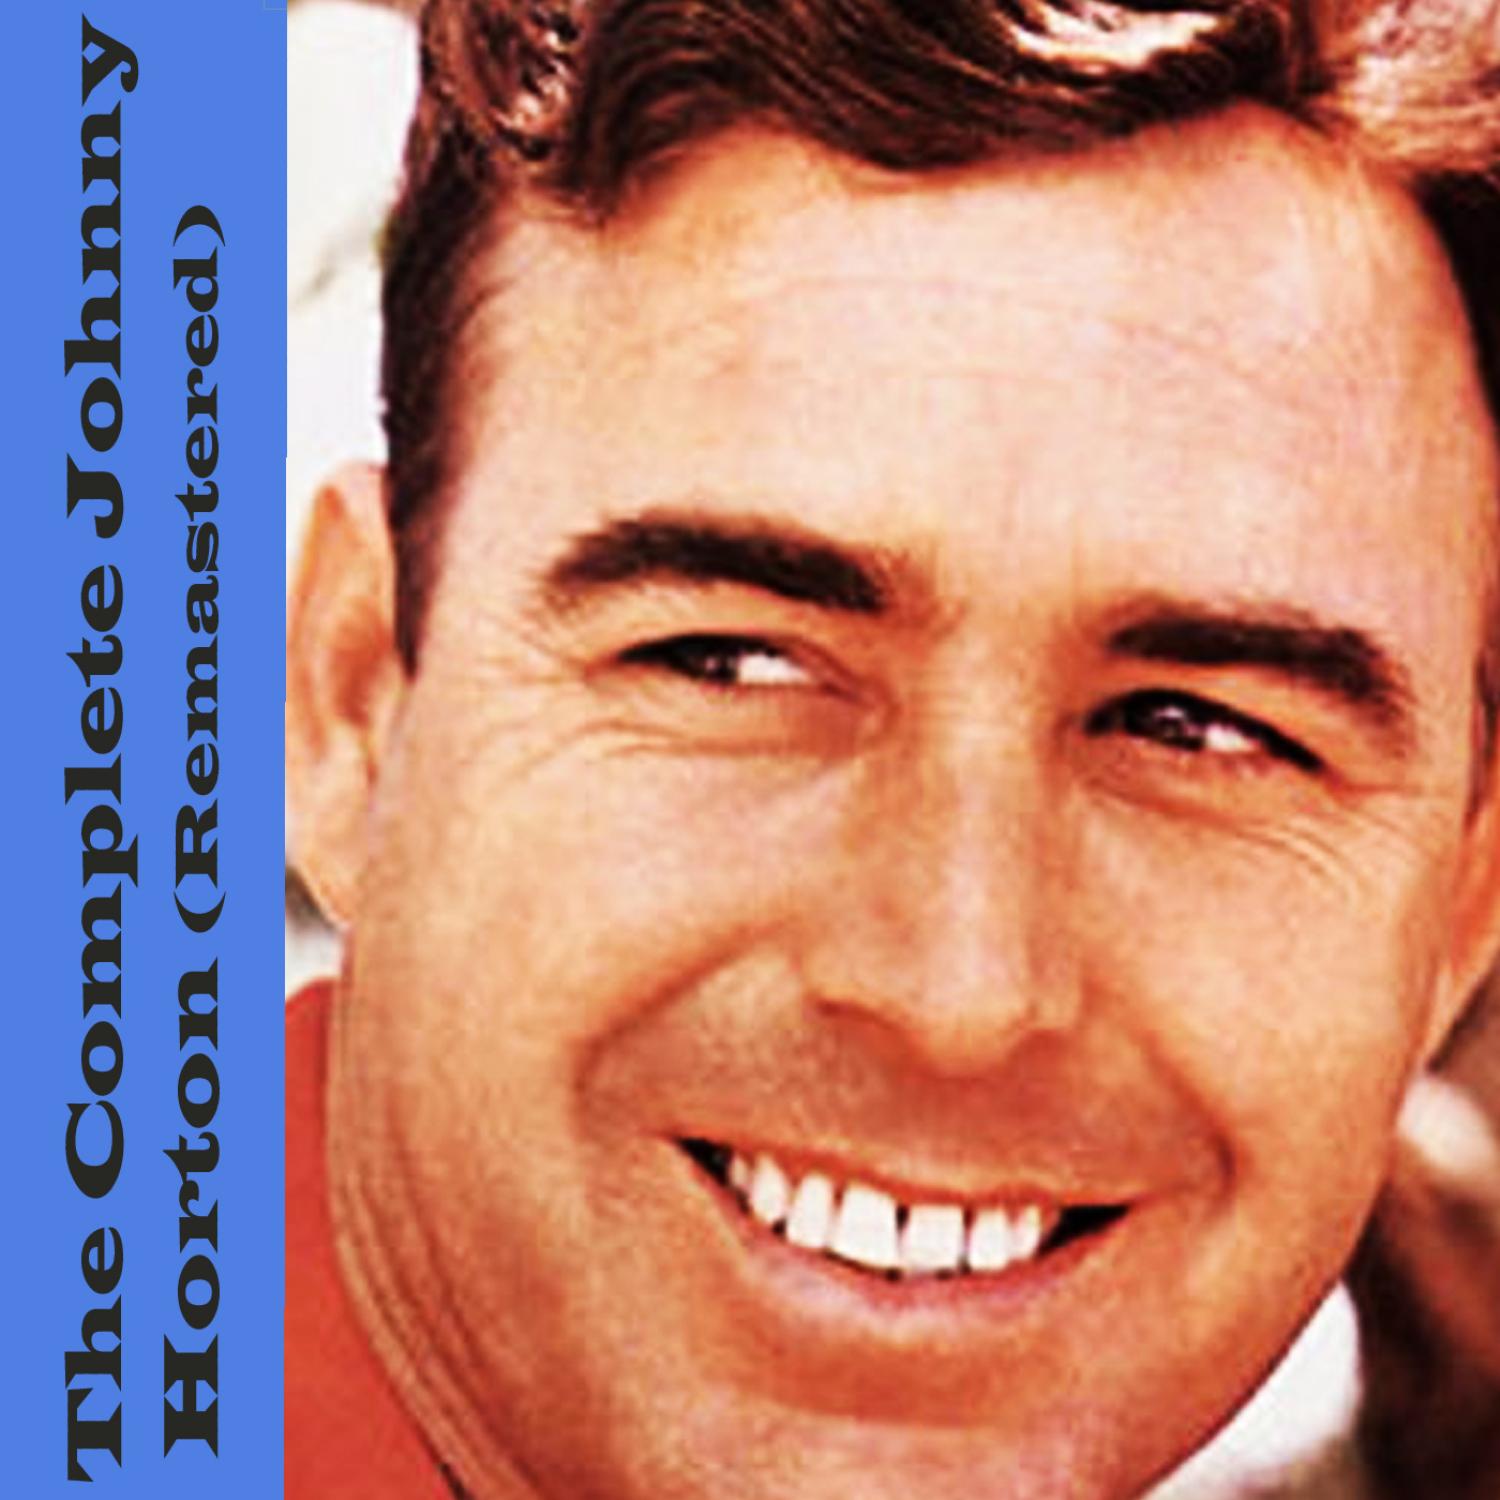 The Complete Johnny Horton (Remastered)